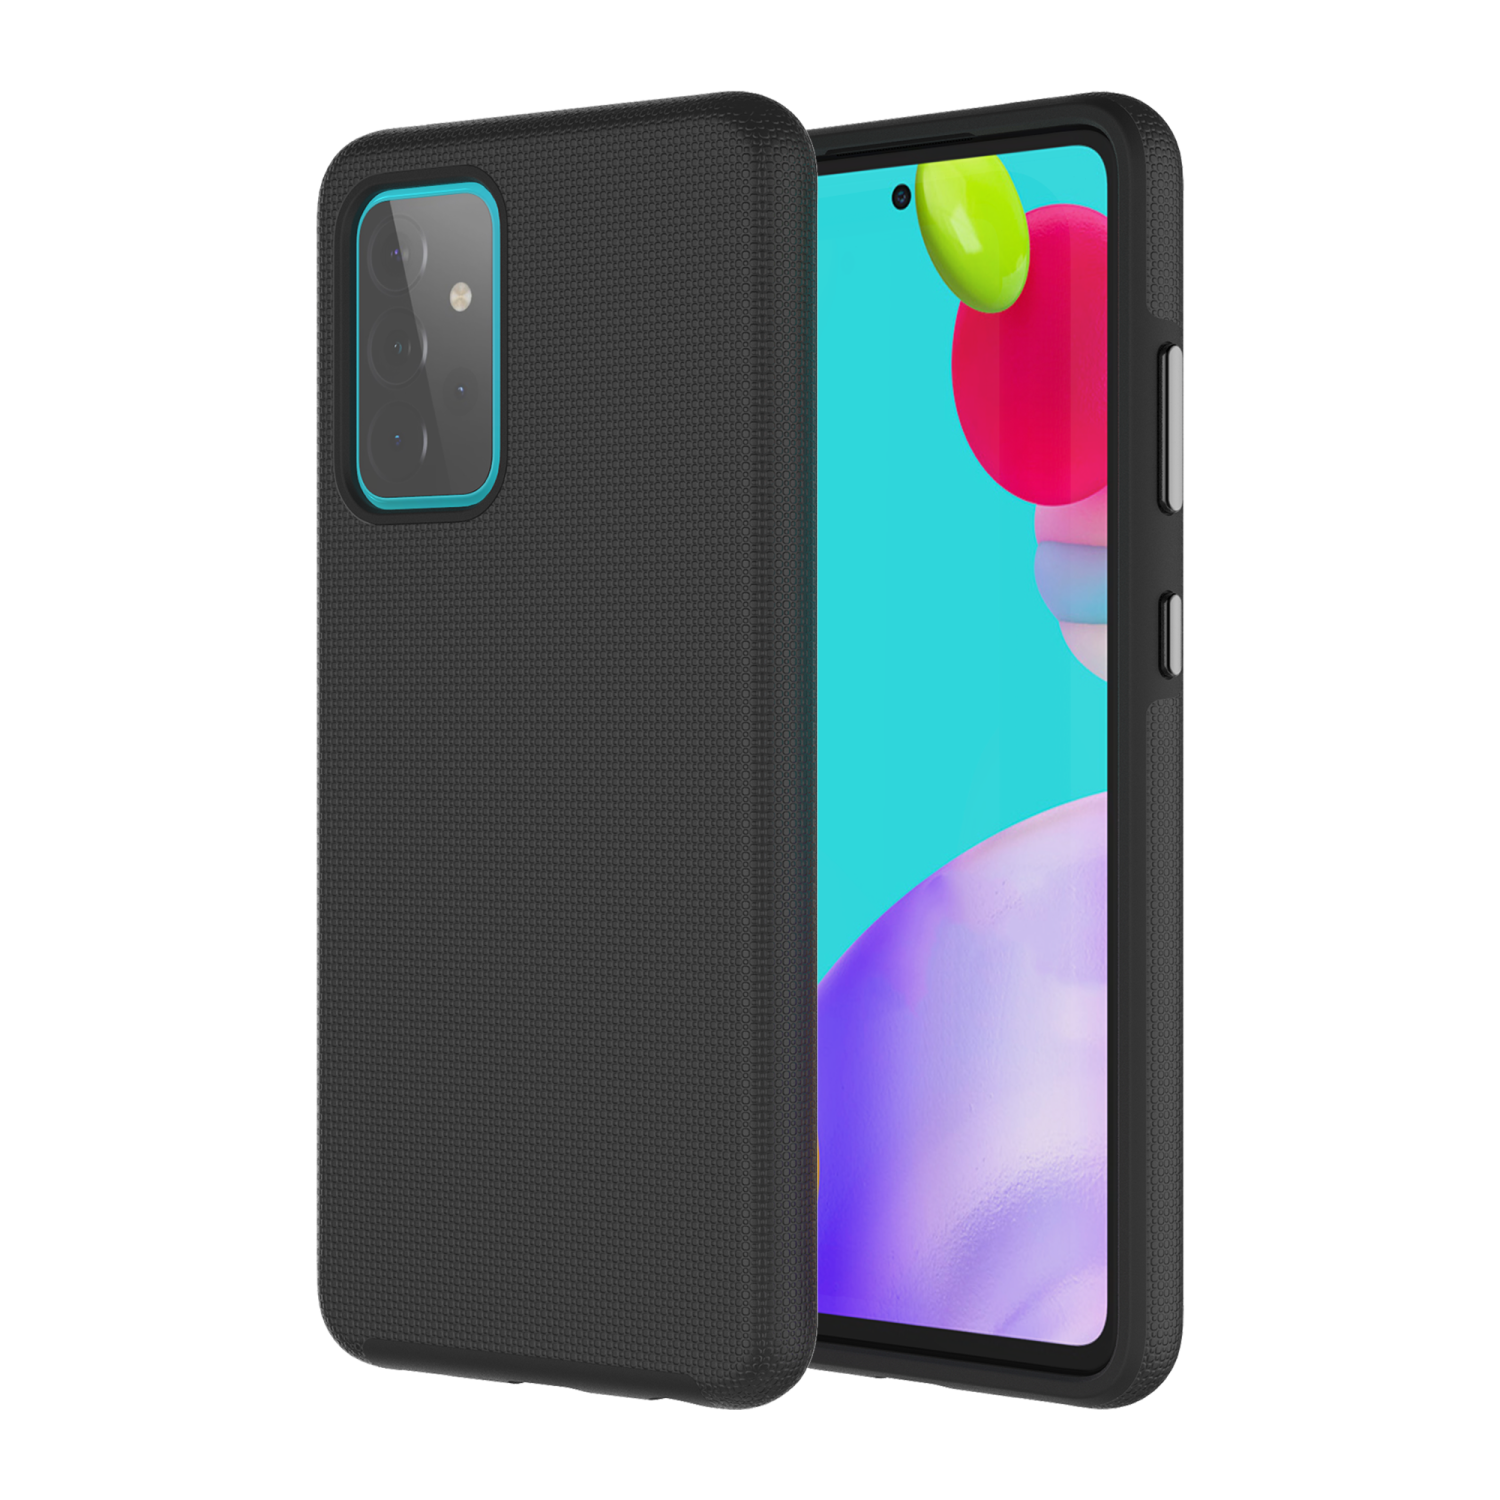 AXS PROTech Dual-Layered Anti-Shock Case with Military-Grade Durability for Samsung Galaxy A52 5G